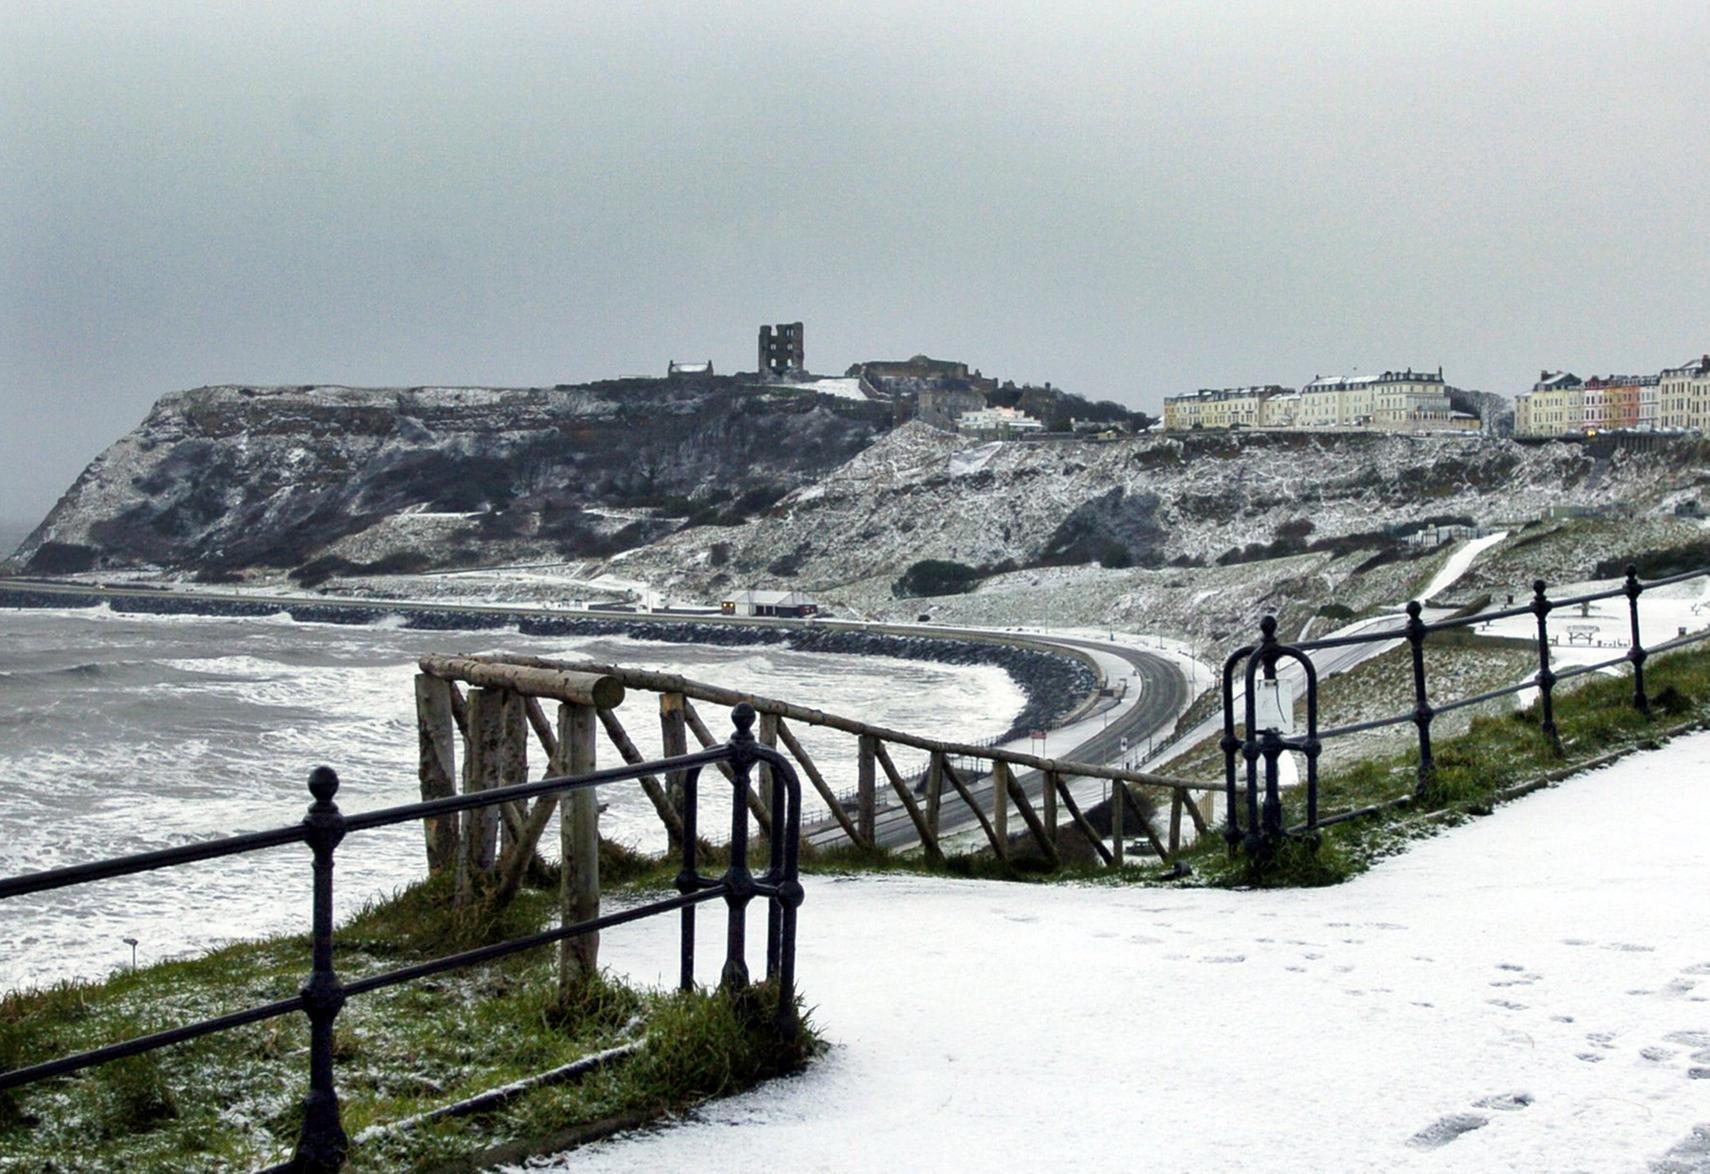 Early snow leaves a dusting on North Bay and the Castle in 2009.